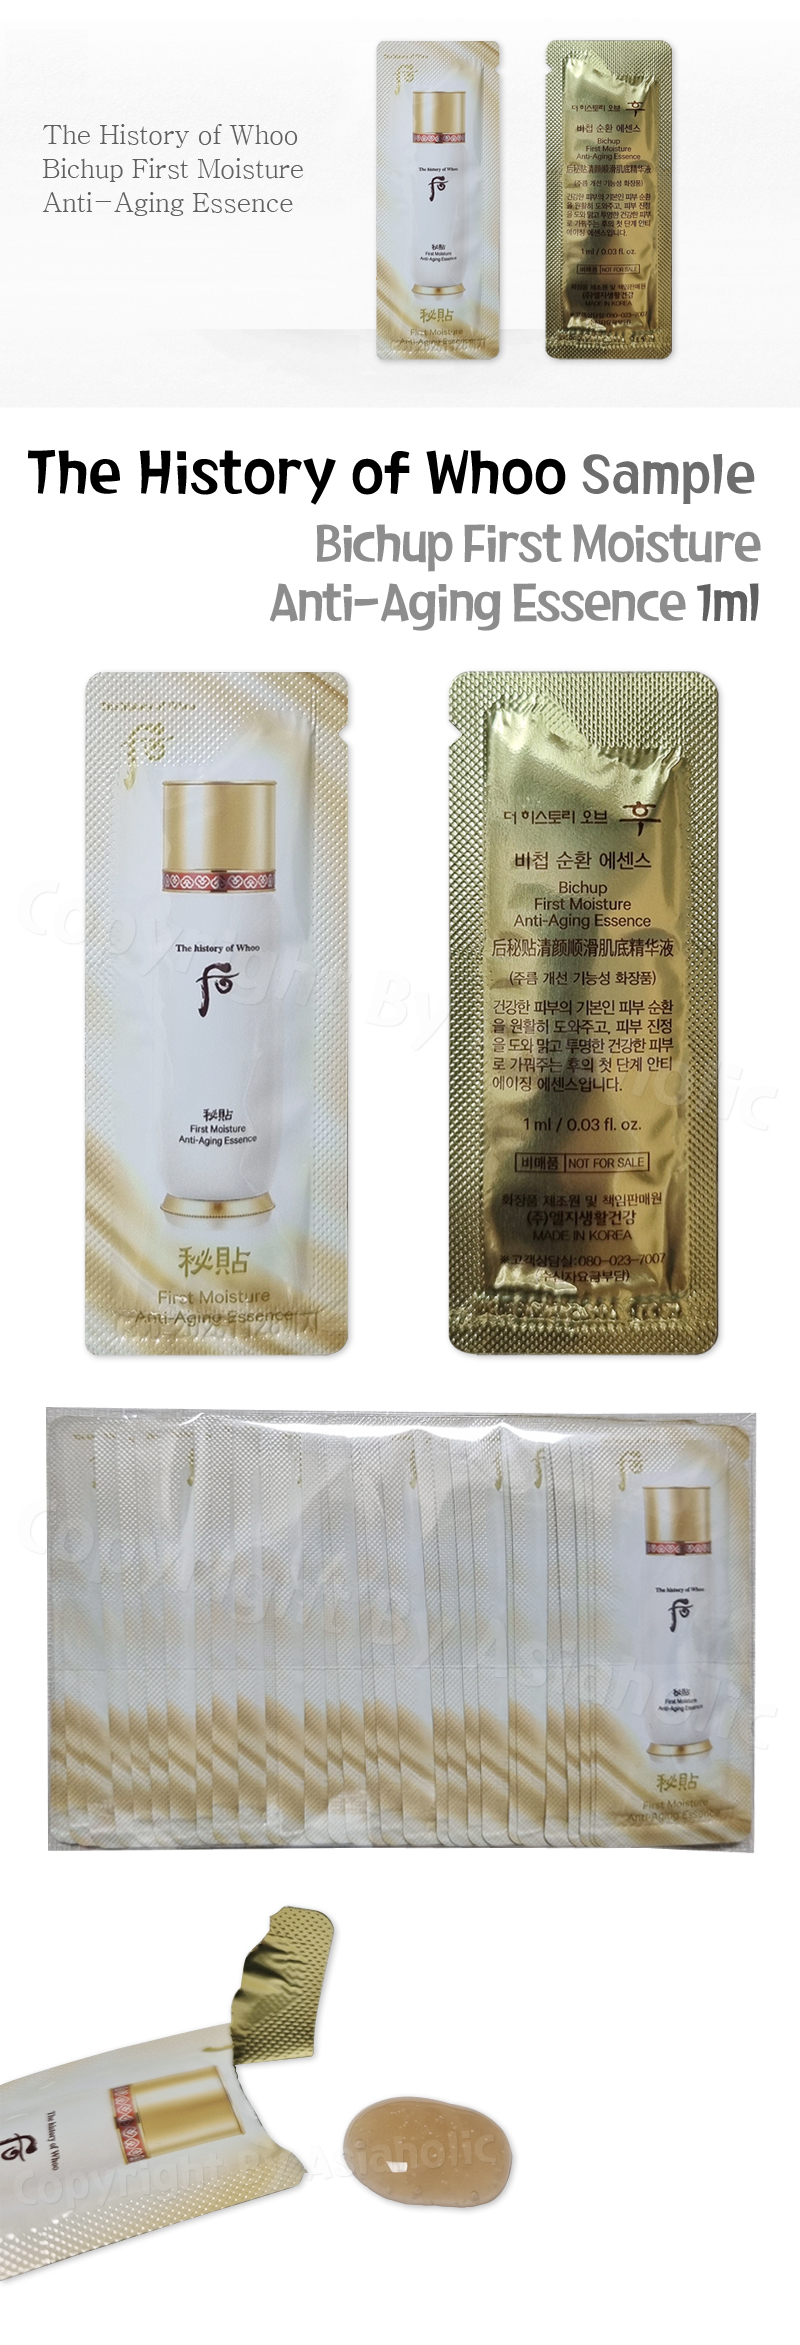 The history of Whoo Bichup First Moisture Anti-Aging Essence 1ml x 30pcs (30ml) Sample Newest Version